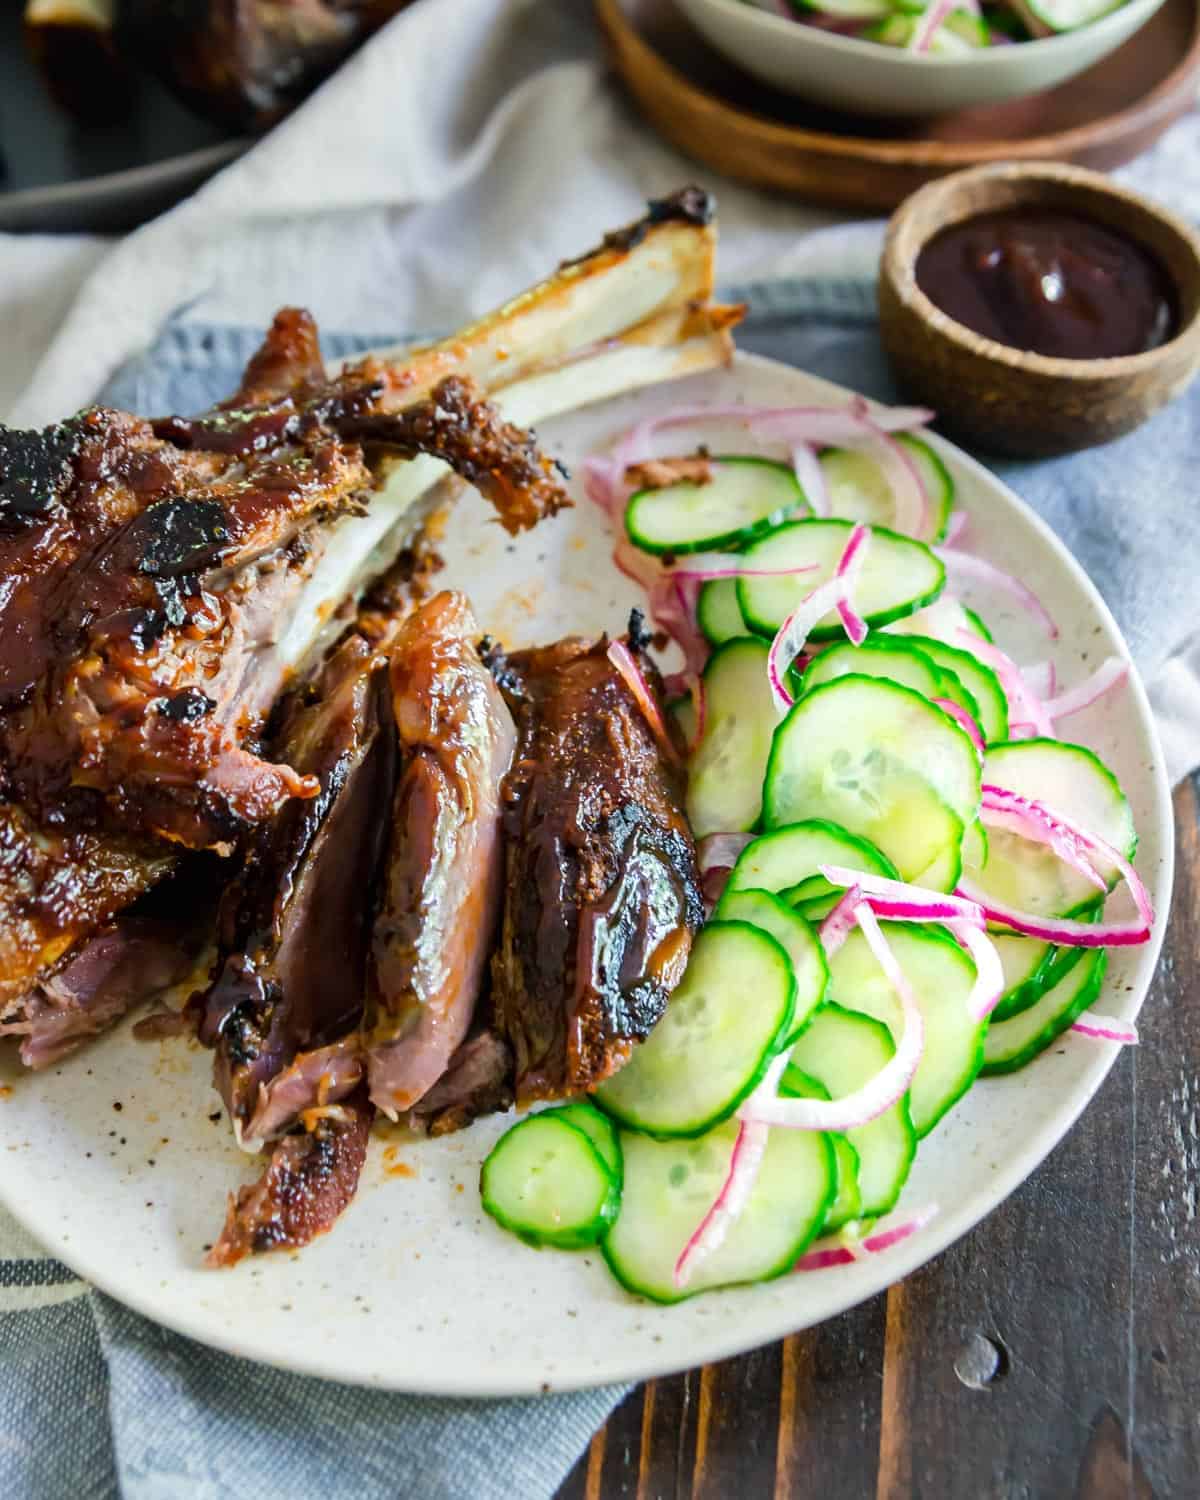 Give these easy BBQ lamb shanks a try this summer when you're looking for a great shareable meal that will have you licking your fingers! Baked low and slow then finished on the grill, they're perfect alongside your favorite summer salad.